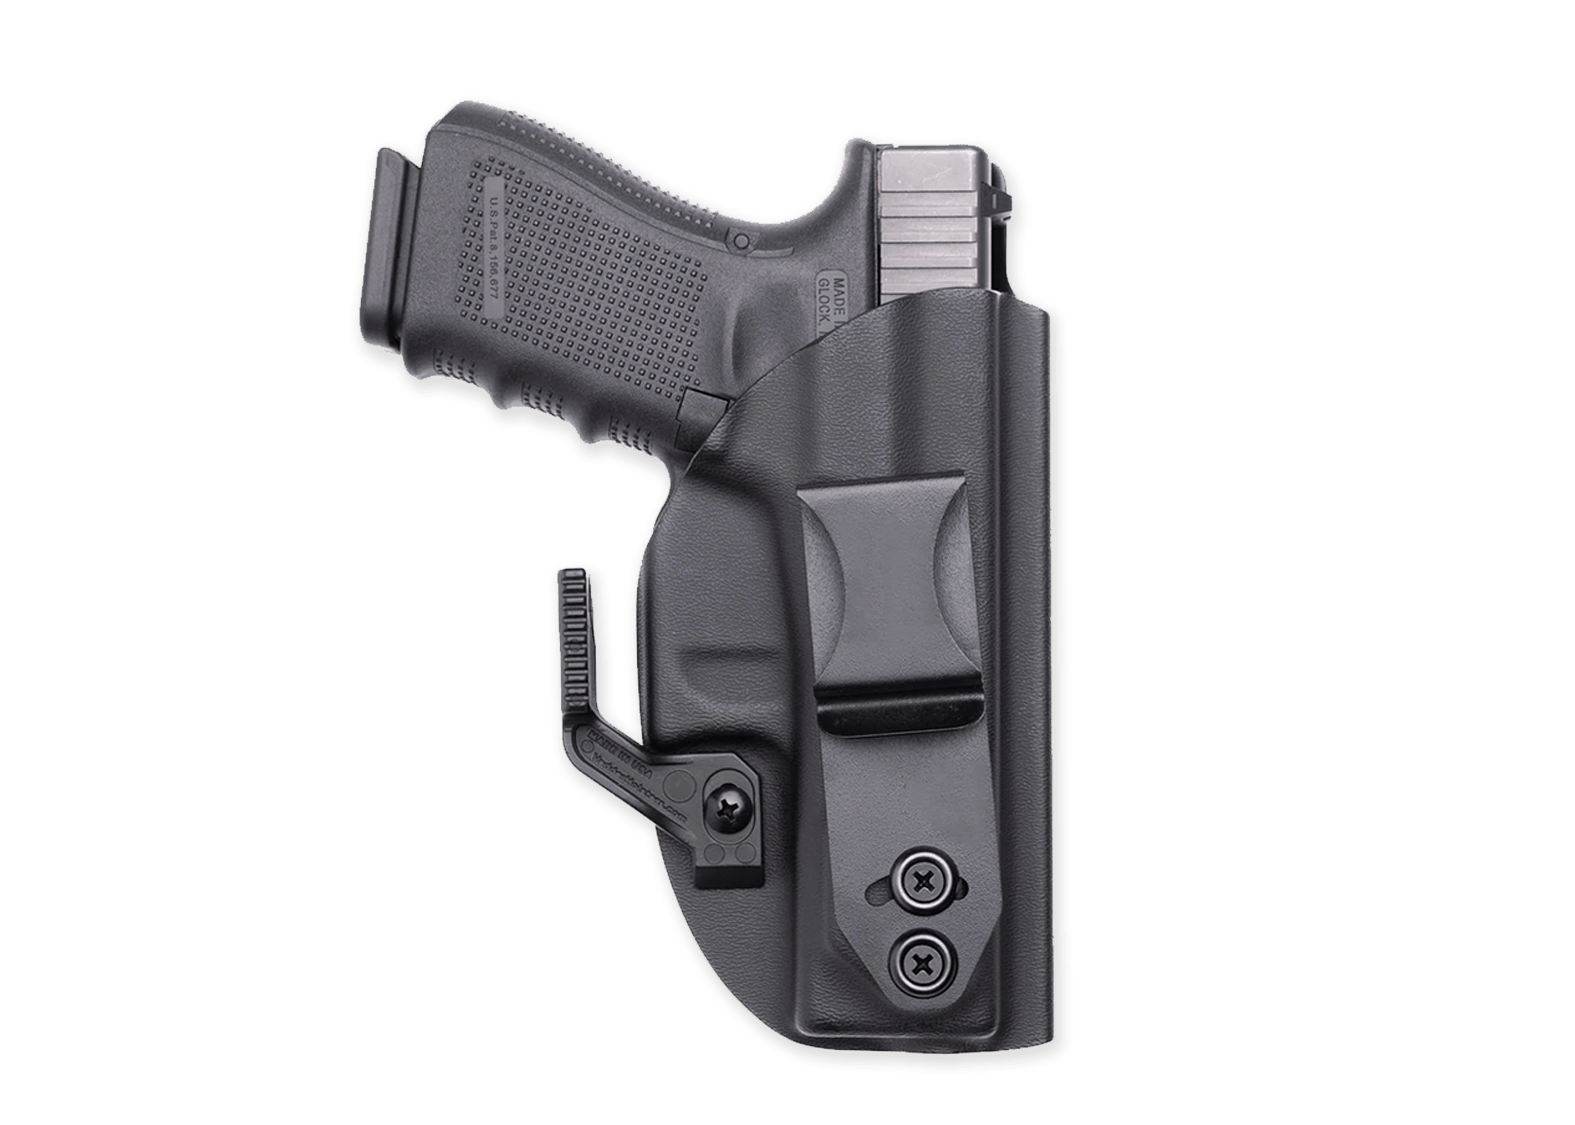 Right Hand Black IWB KYDEX Holster Glock Shield Holster Inside The Waistband Concealed Carry Adjustable Retention and Cant 